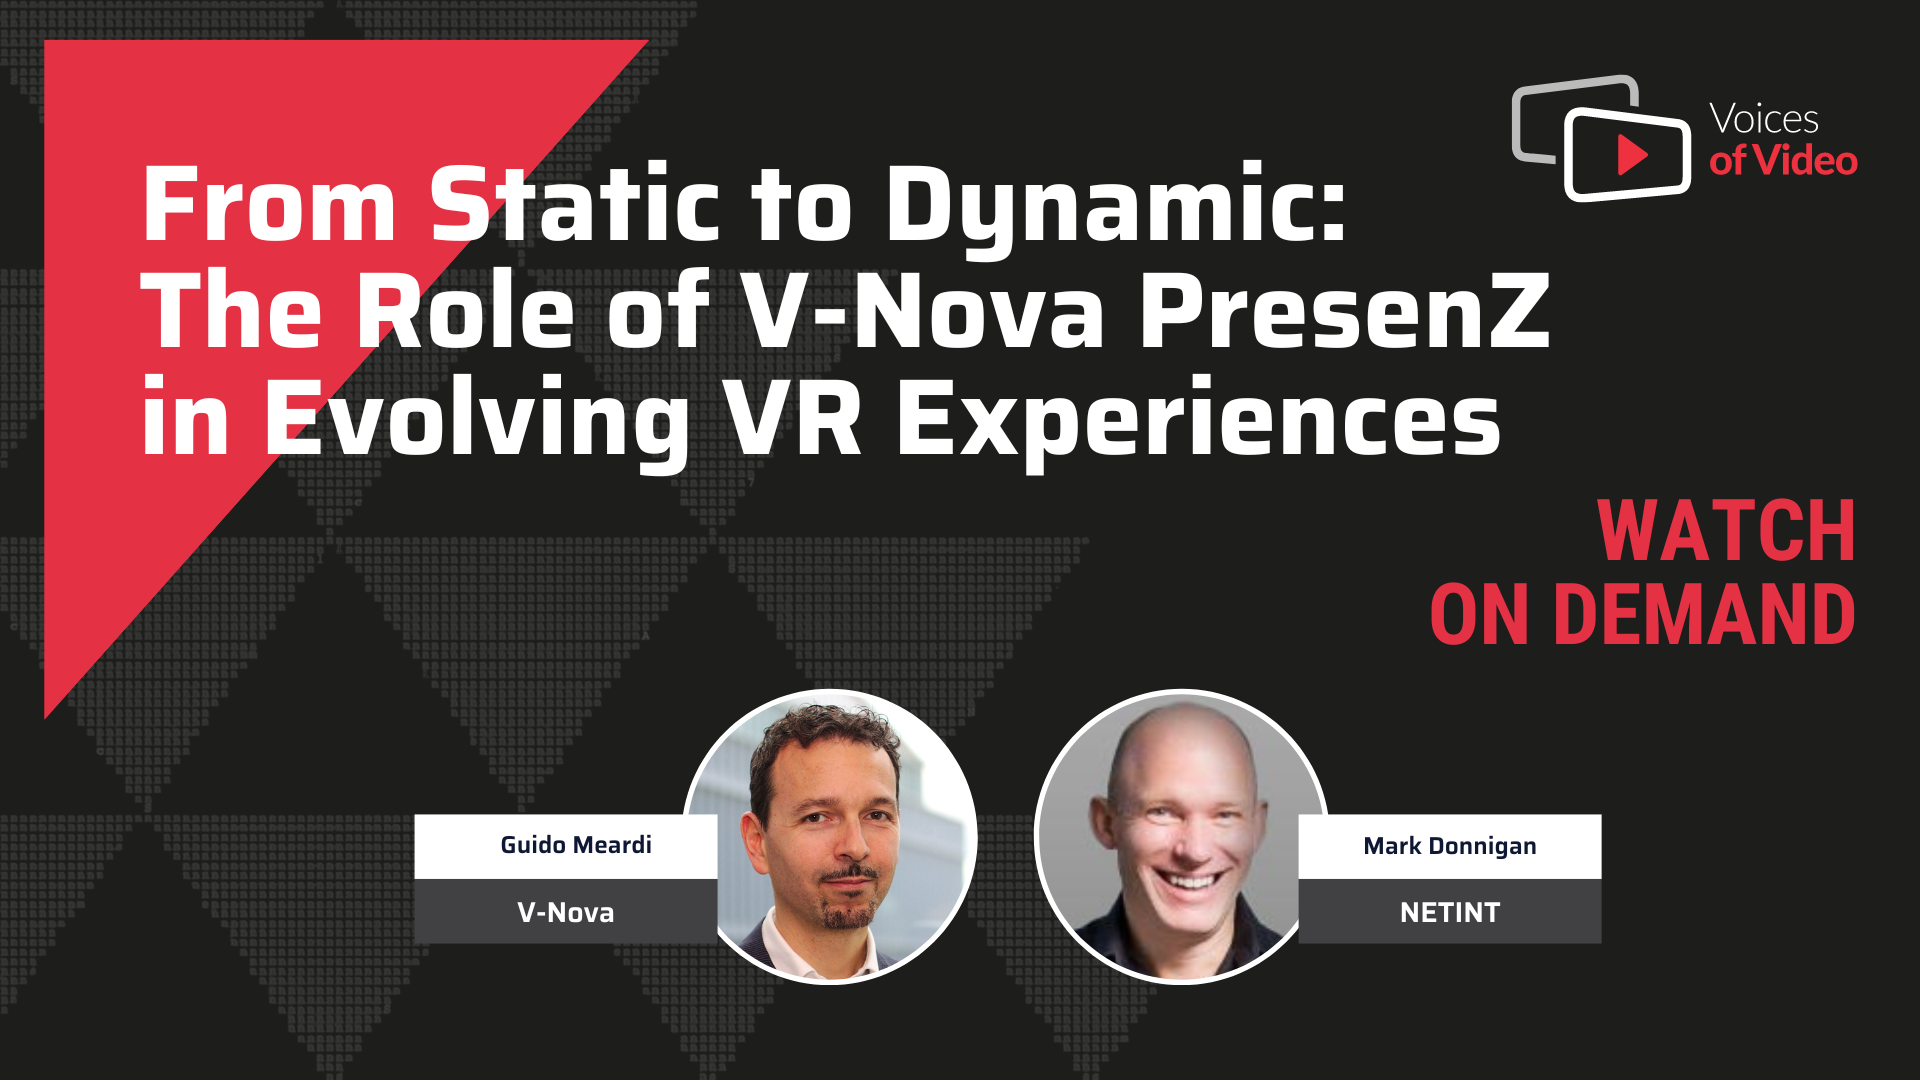 From Static to Dynamic: The Role of PresenZ in Evolving VR Experiences - Voices of Video with Guido Meardi, CEO and Co-Founder at V-Nova